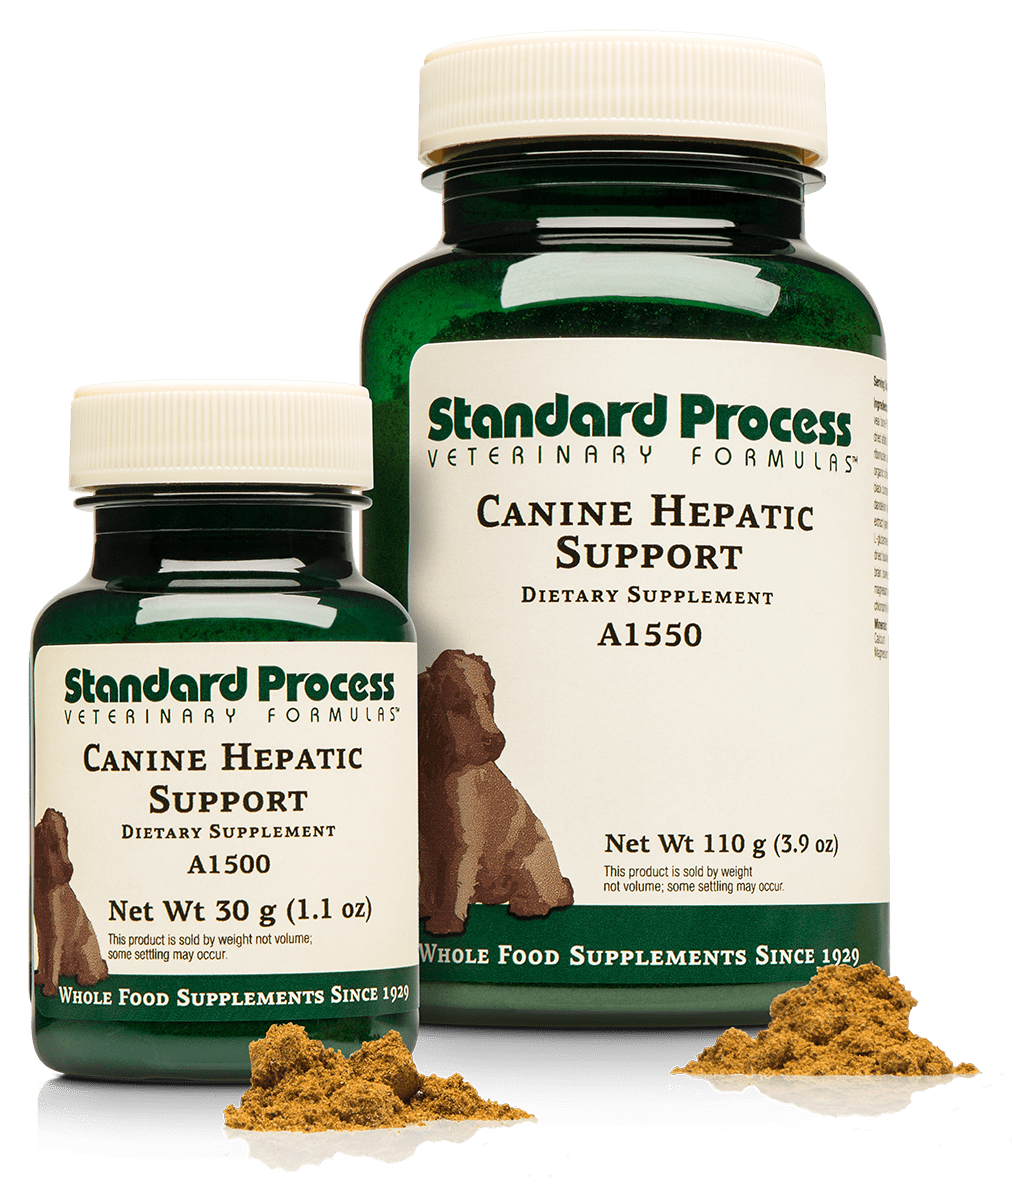 Standard Process Canine Hepatic Support 30g powder